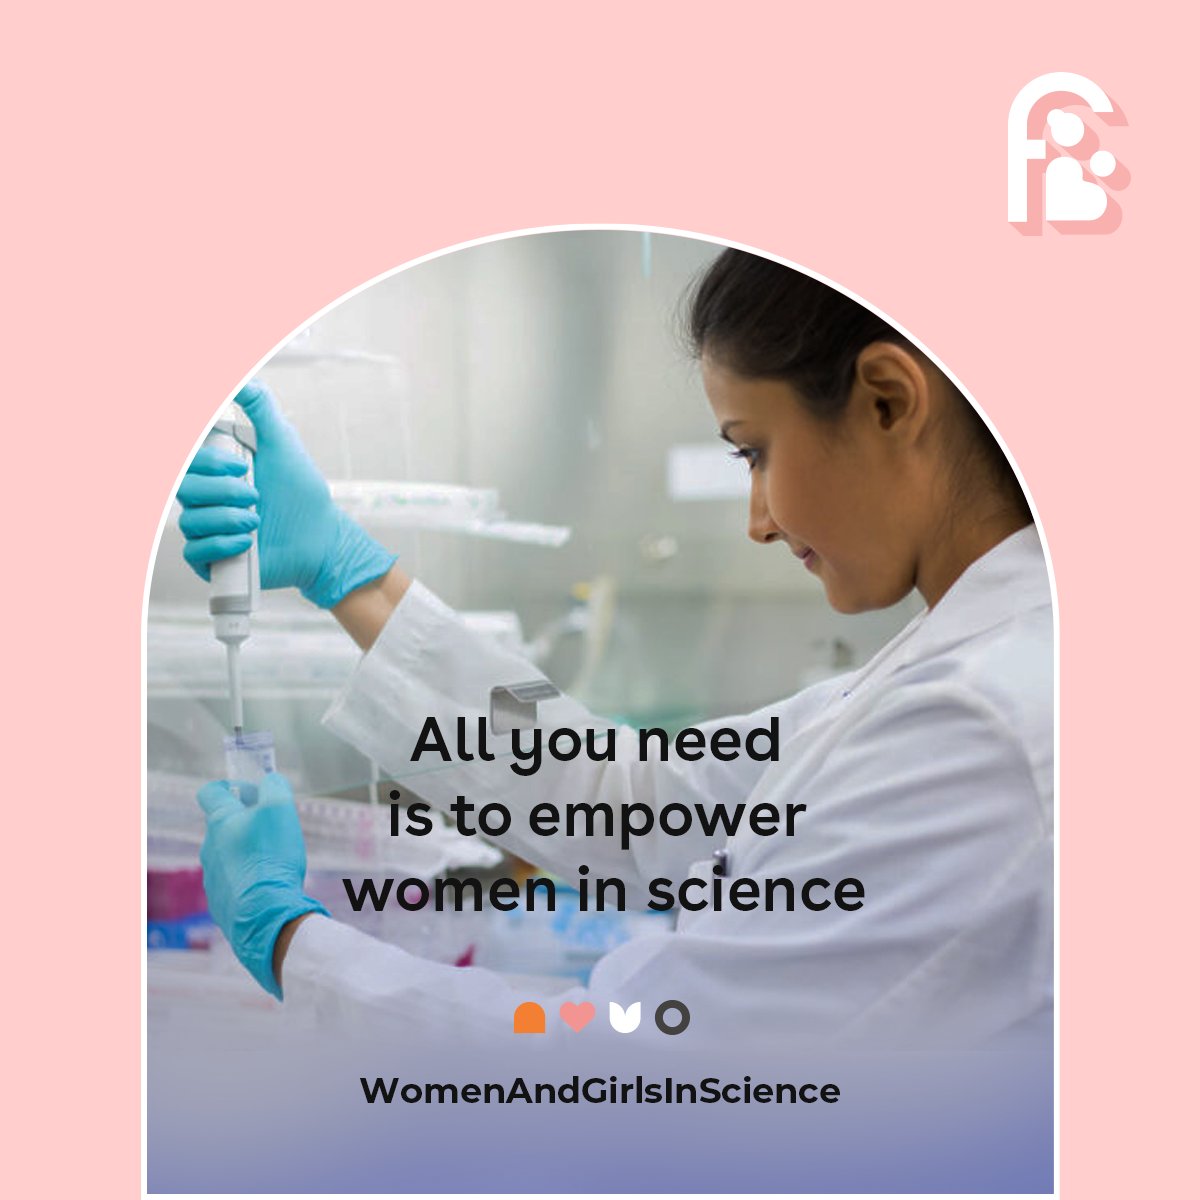 Let us envision a world where women and girls have the opportunity to explore the wonders of science without limitations. #WomenAndGirlsInScience #GirlPower